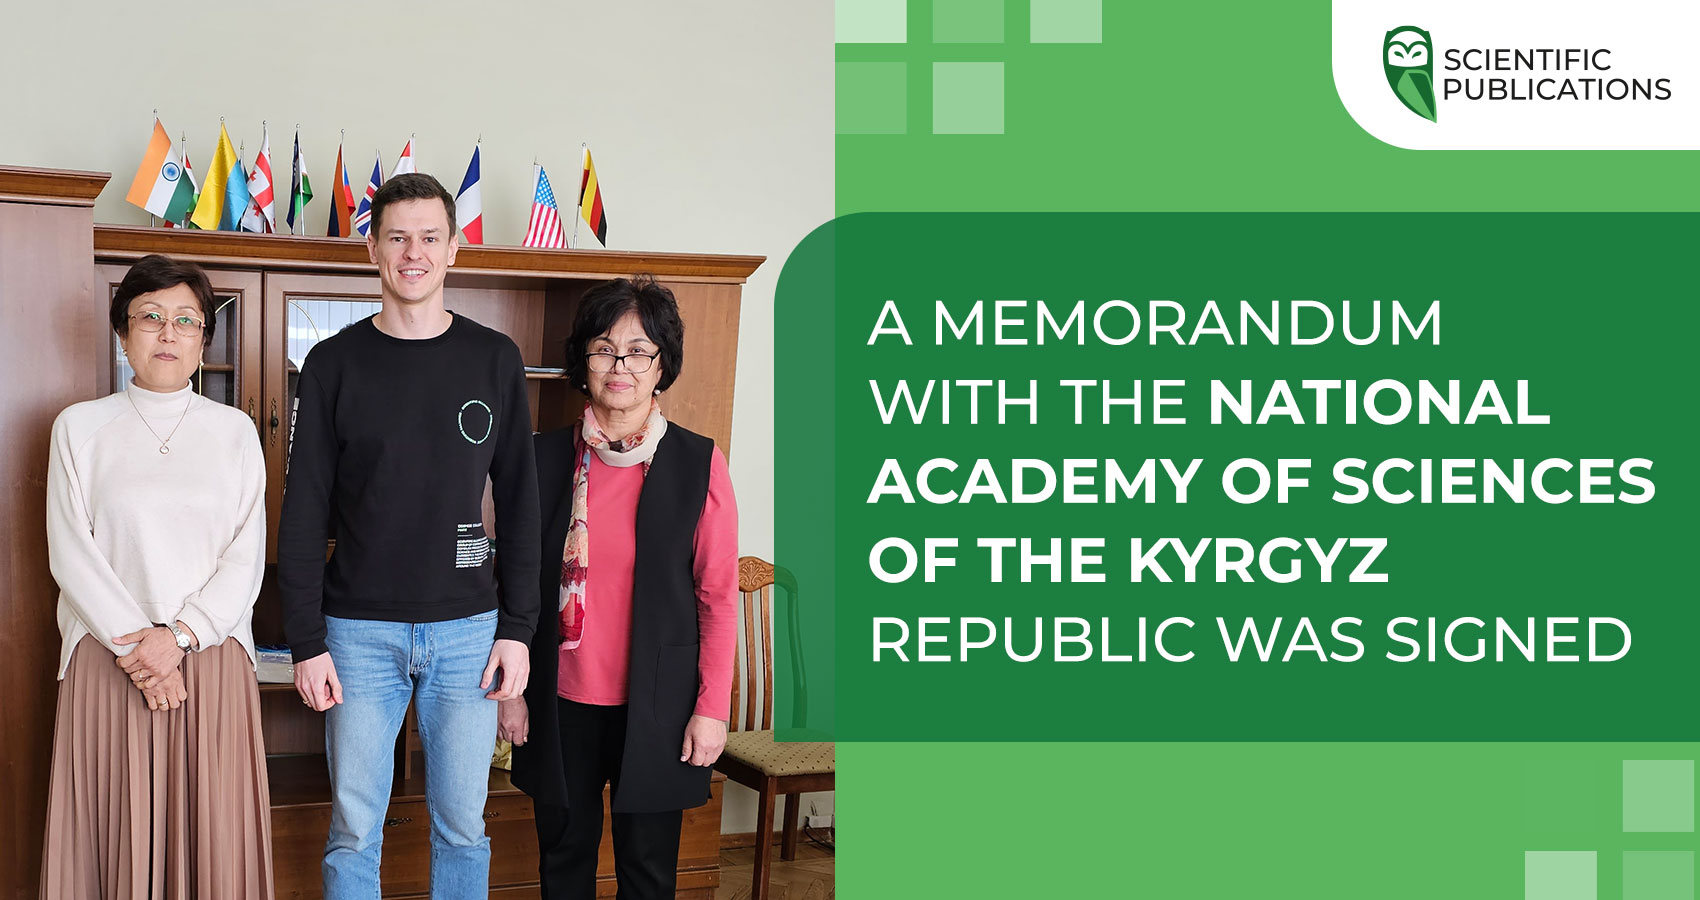 A memorandum with the National Academy of Sciences of the Kyrgyz Republic has been signed